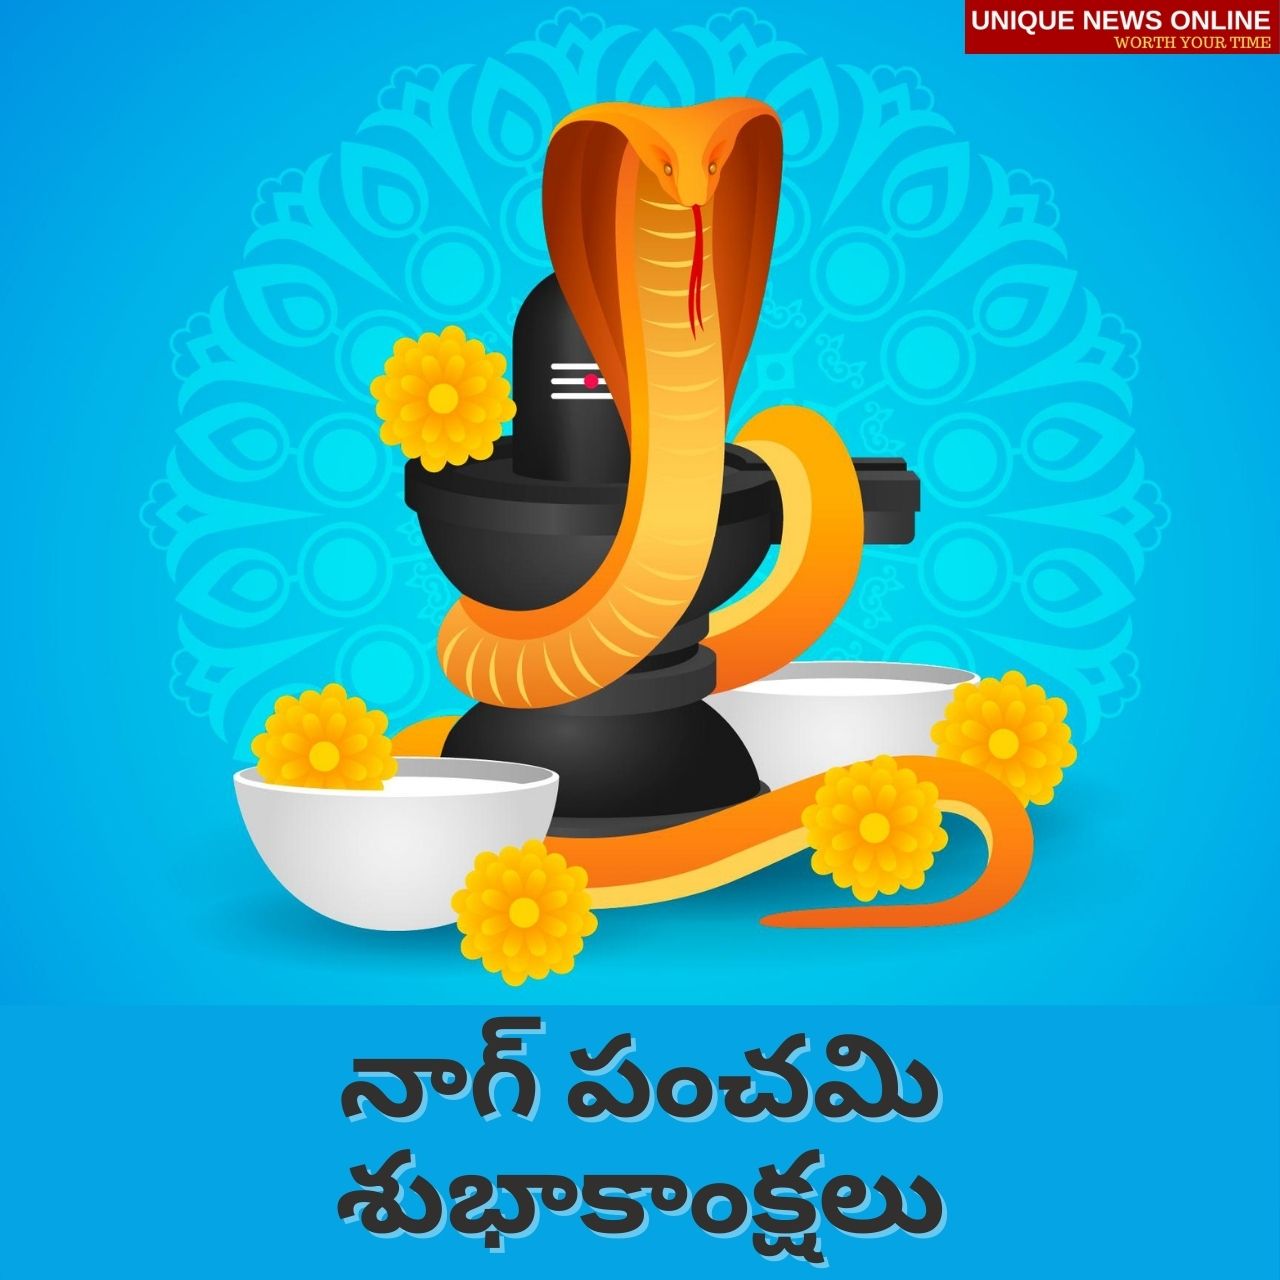 Happy Nag Panchami 2021 Telugu and Kannada Wishes: Messages, Greetings, Wallpaper,  HD Images, Quotes, Poster, and